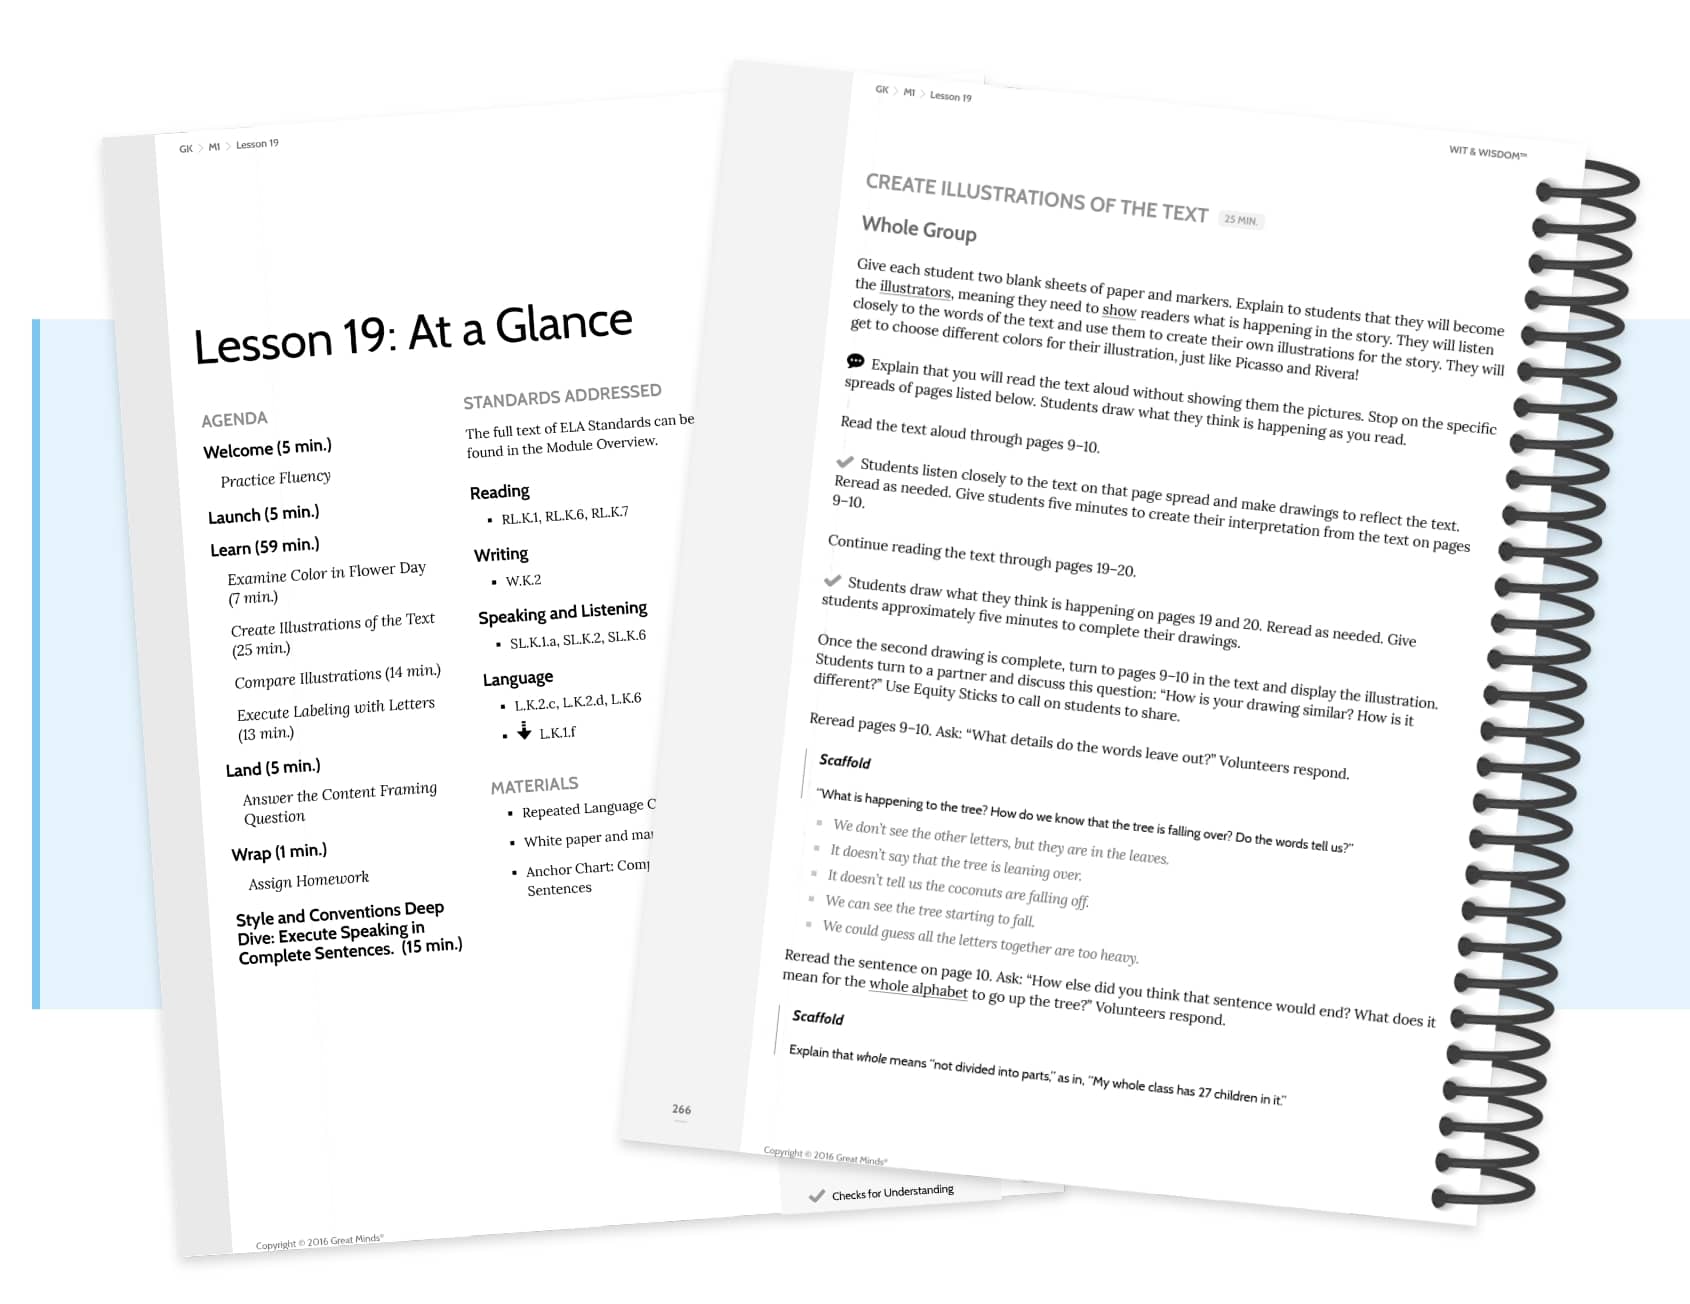 Sample Wit & Wisdom open book with Lesson 19: At a Glance